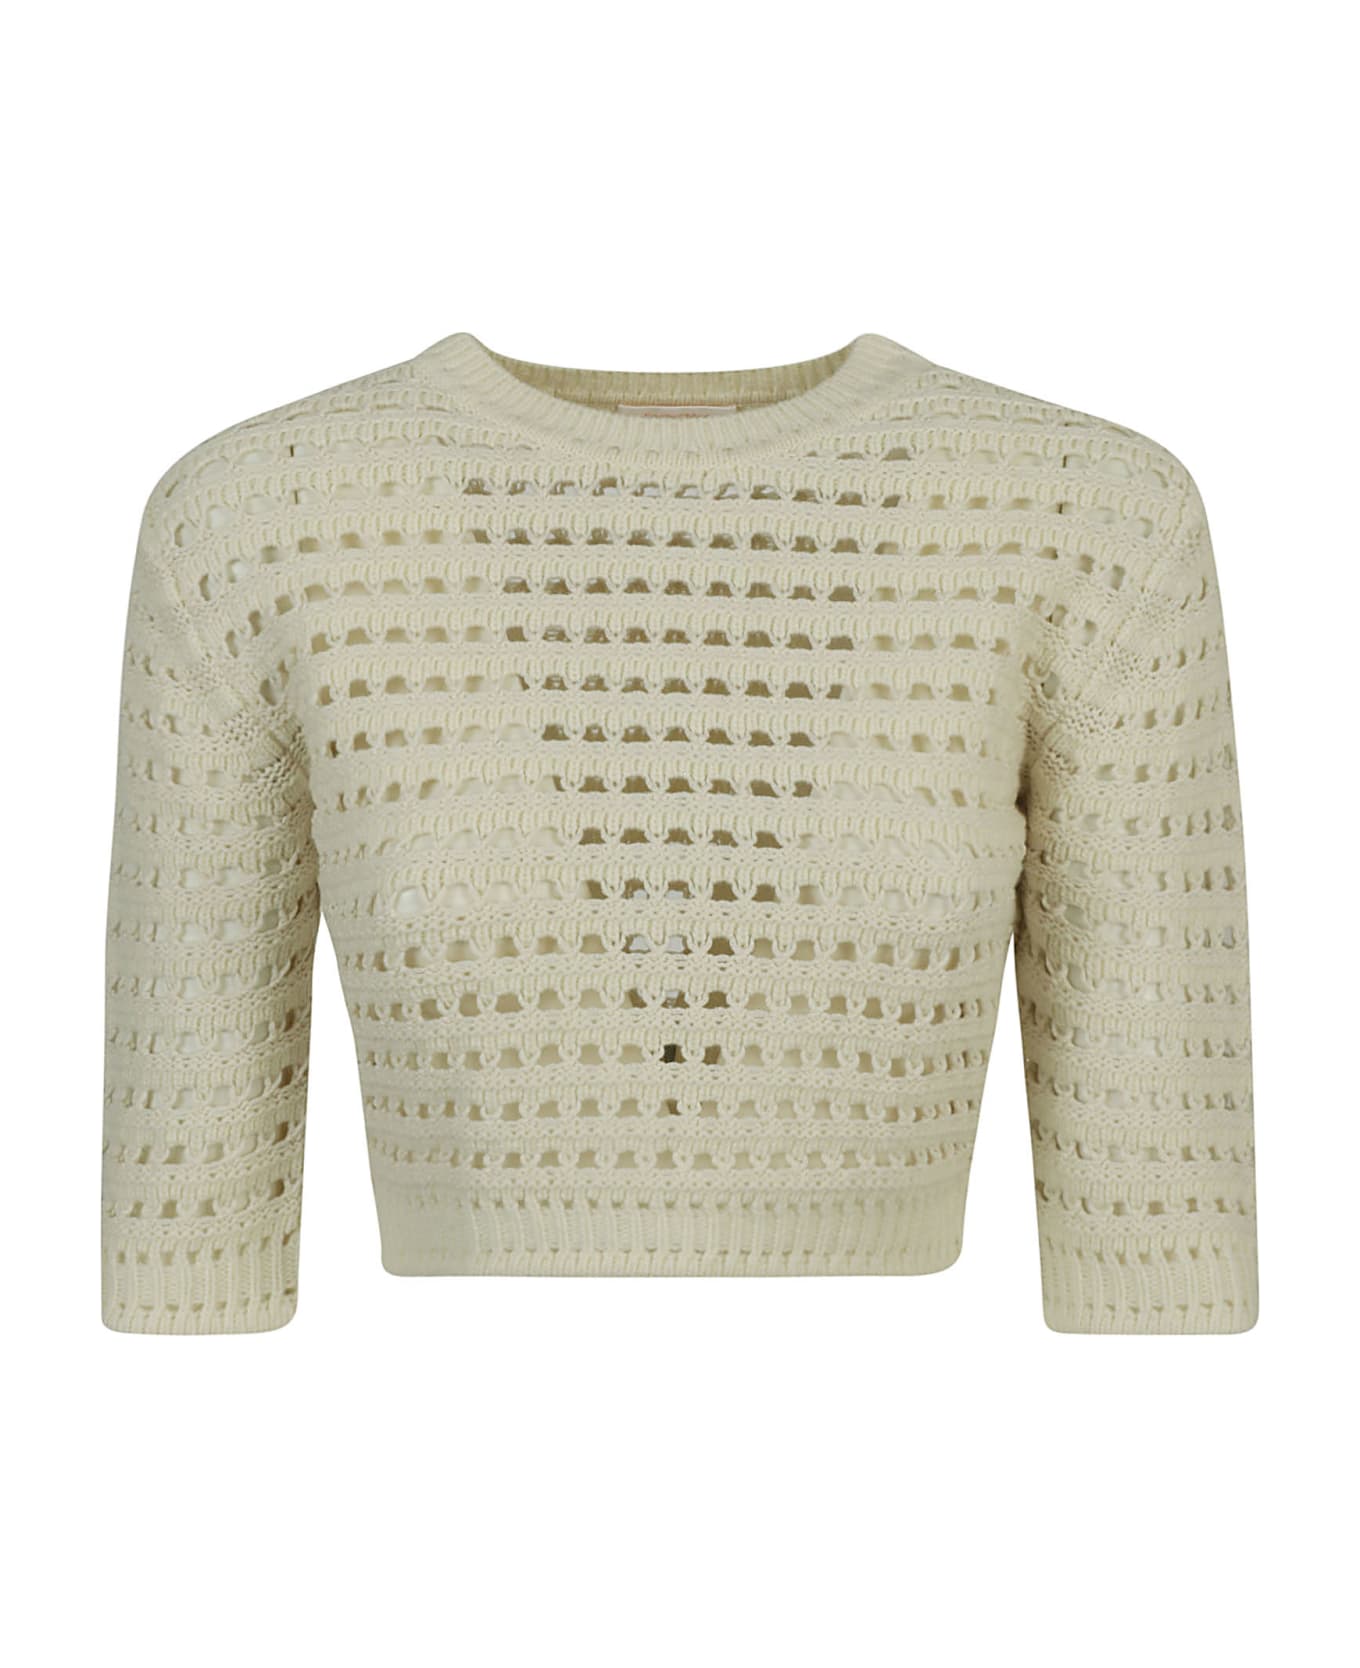 See by Chloé Crochet Cropped Top - White